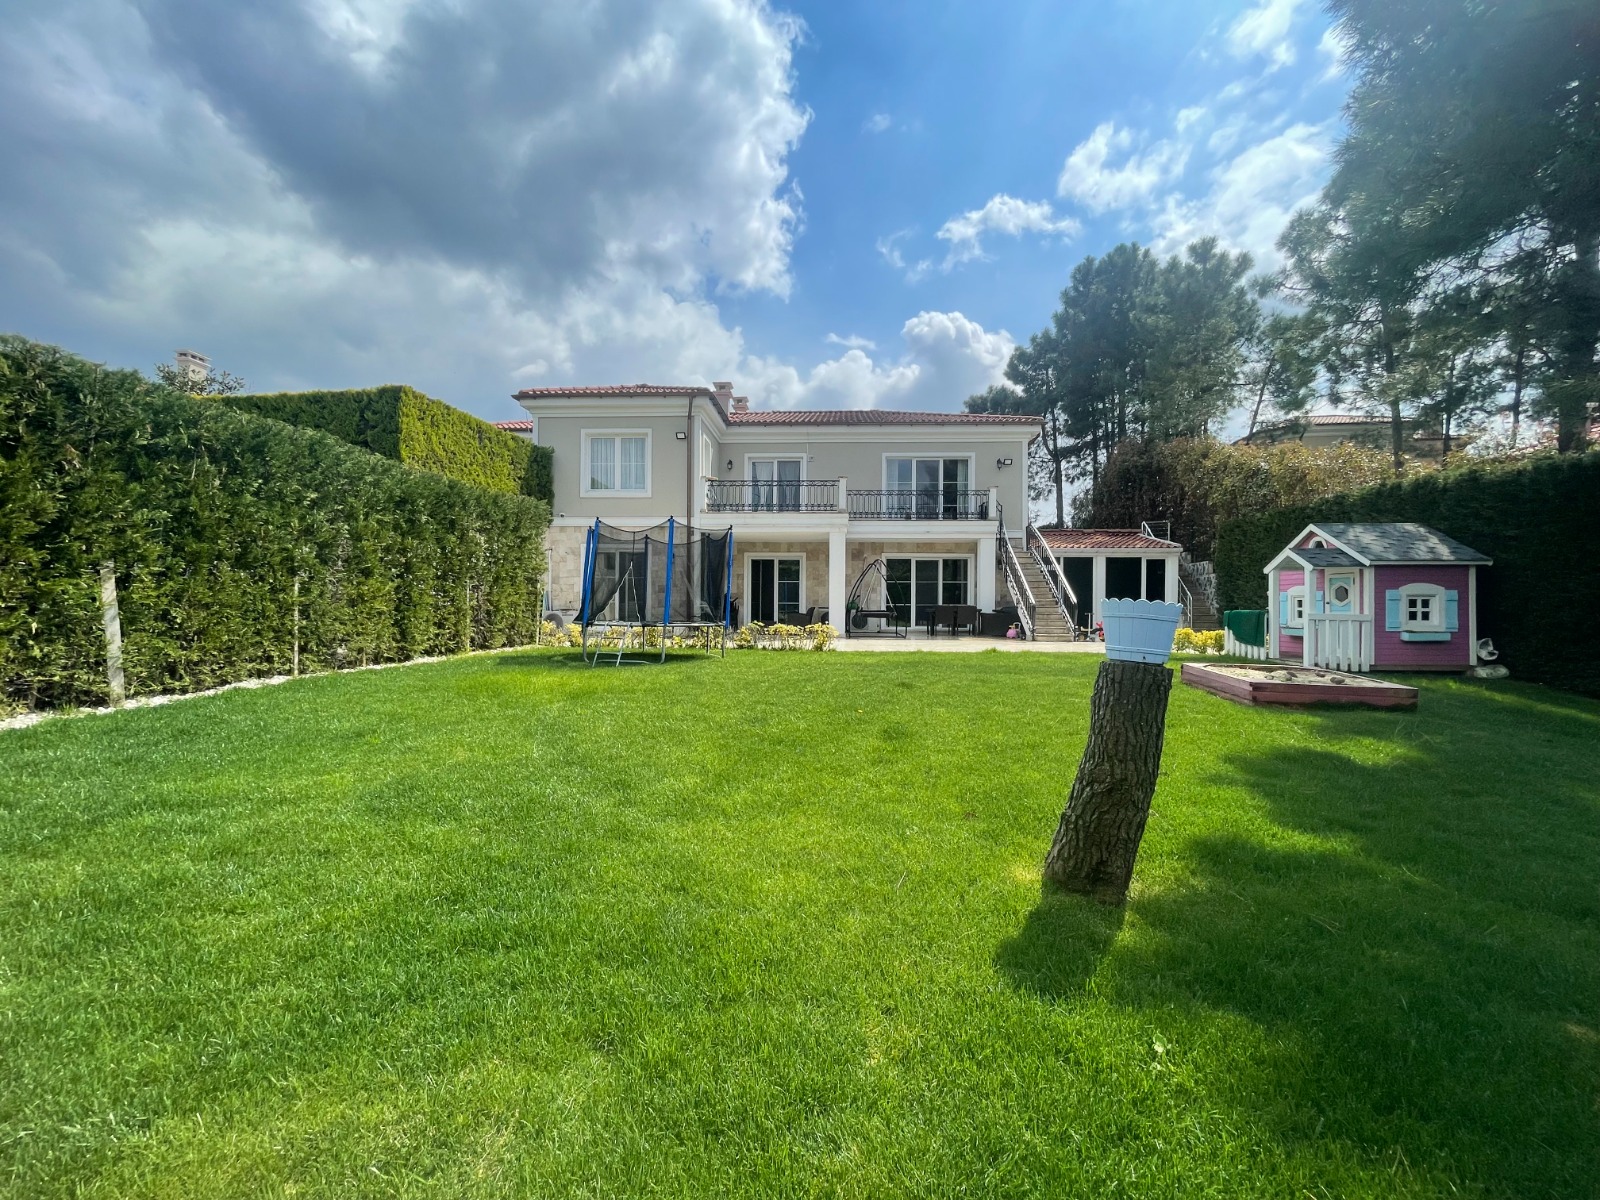 Forest View Villa With Pool in Arnavutköy Neo Golpark For Sale